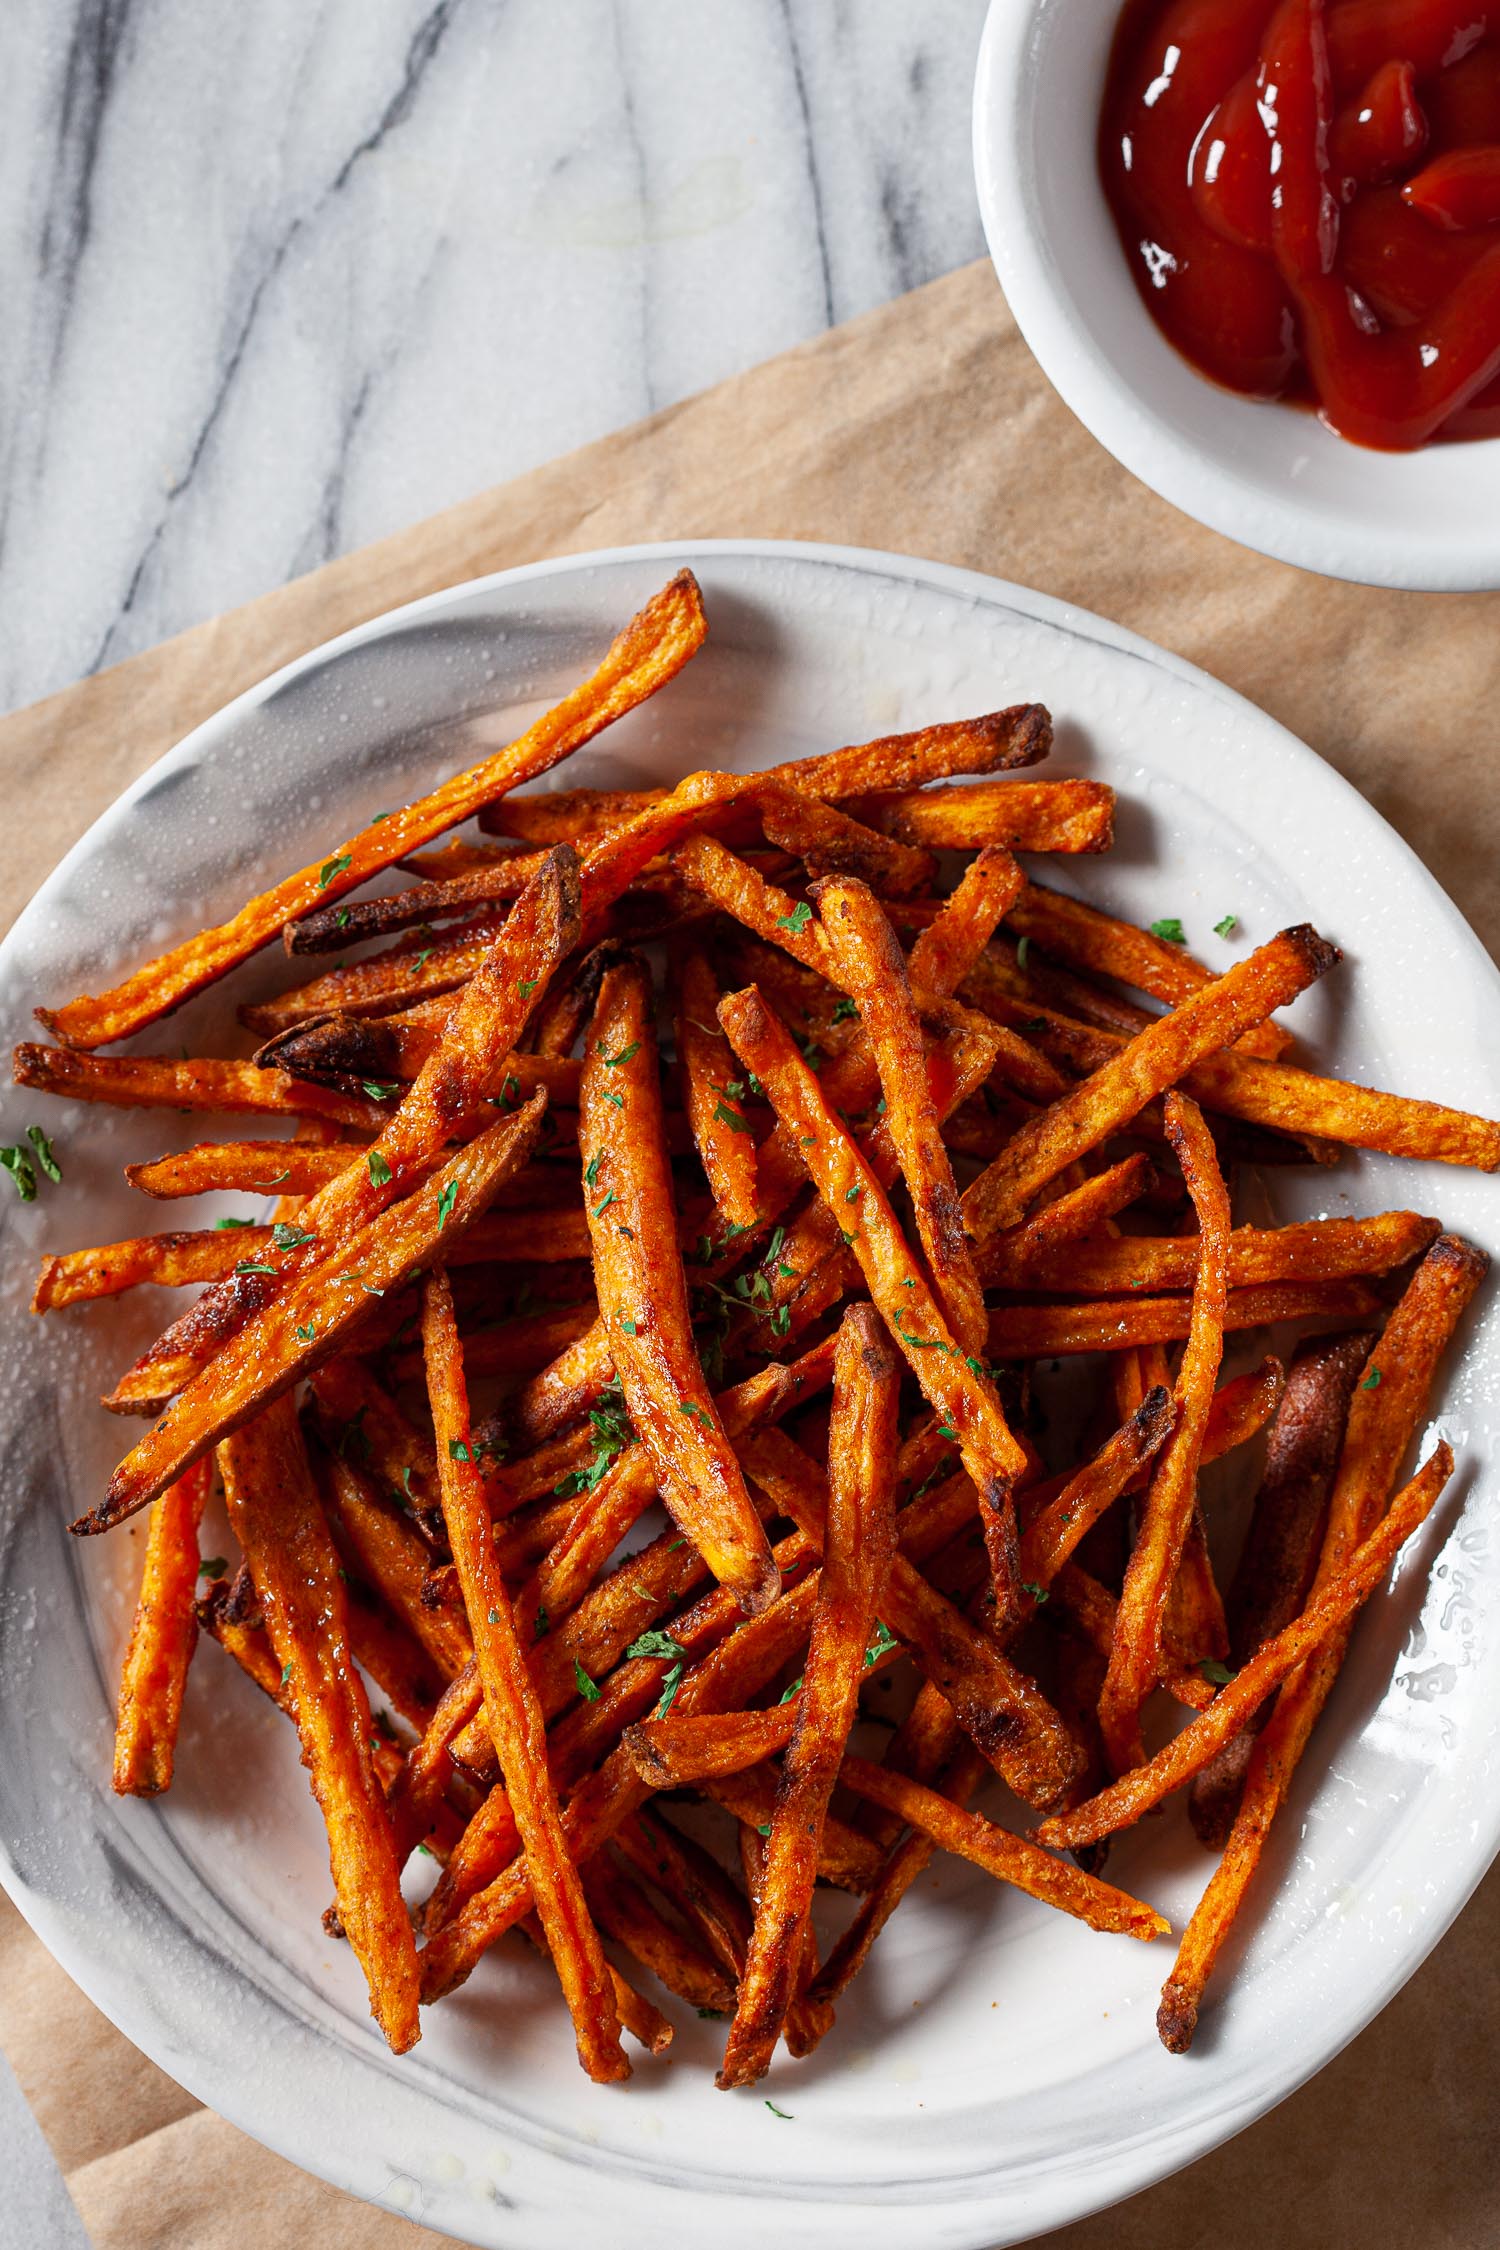 https://www.chewoutloud.com/wp-content/uploads/2023/01/Sweet-Potato-Fries-on-White-Plate-with-Ketchup.jpg